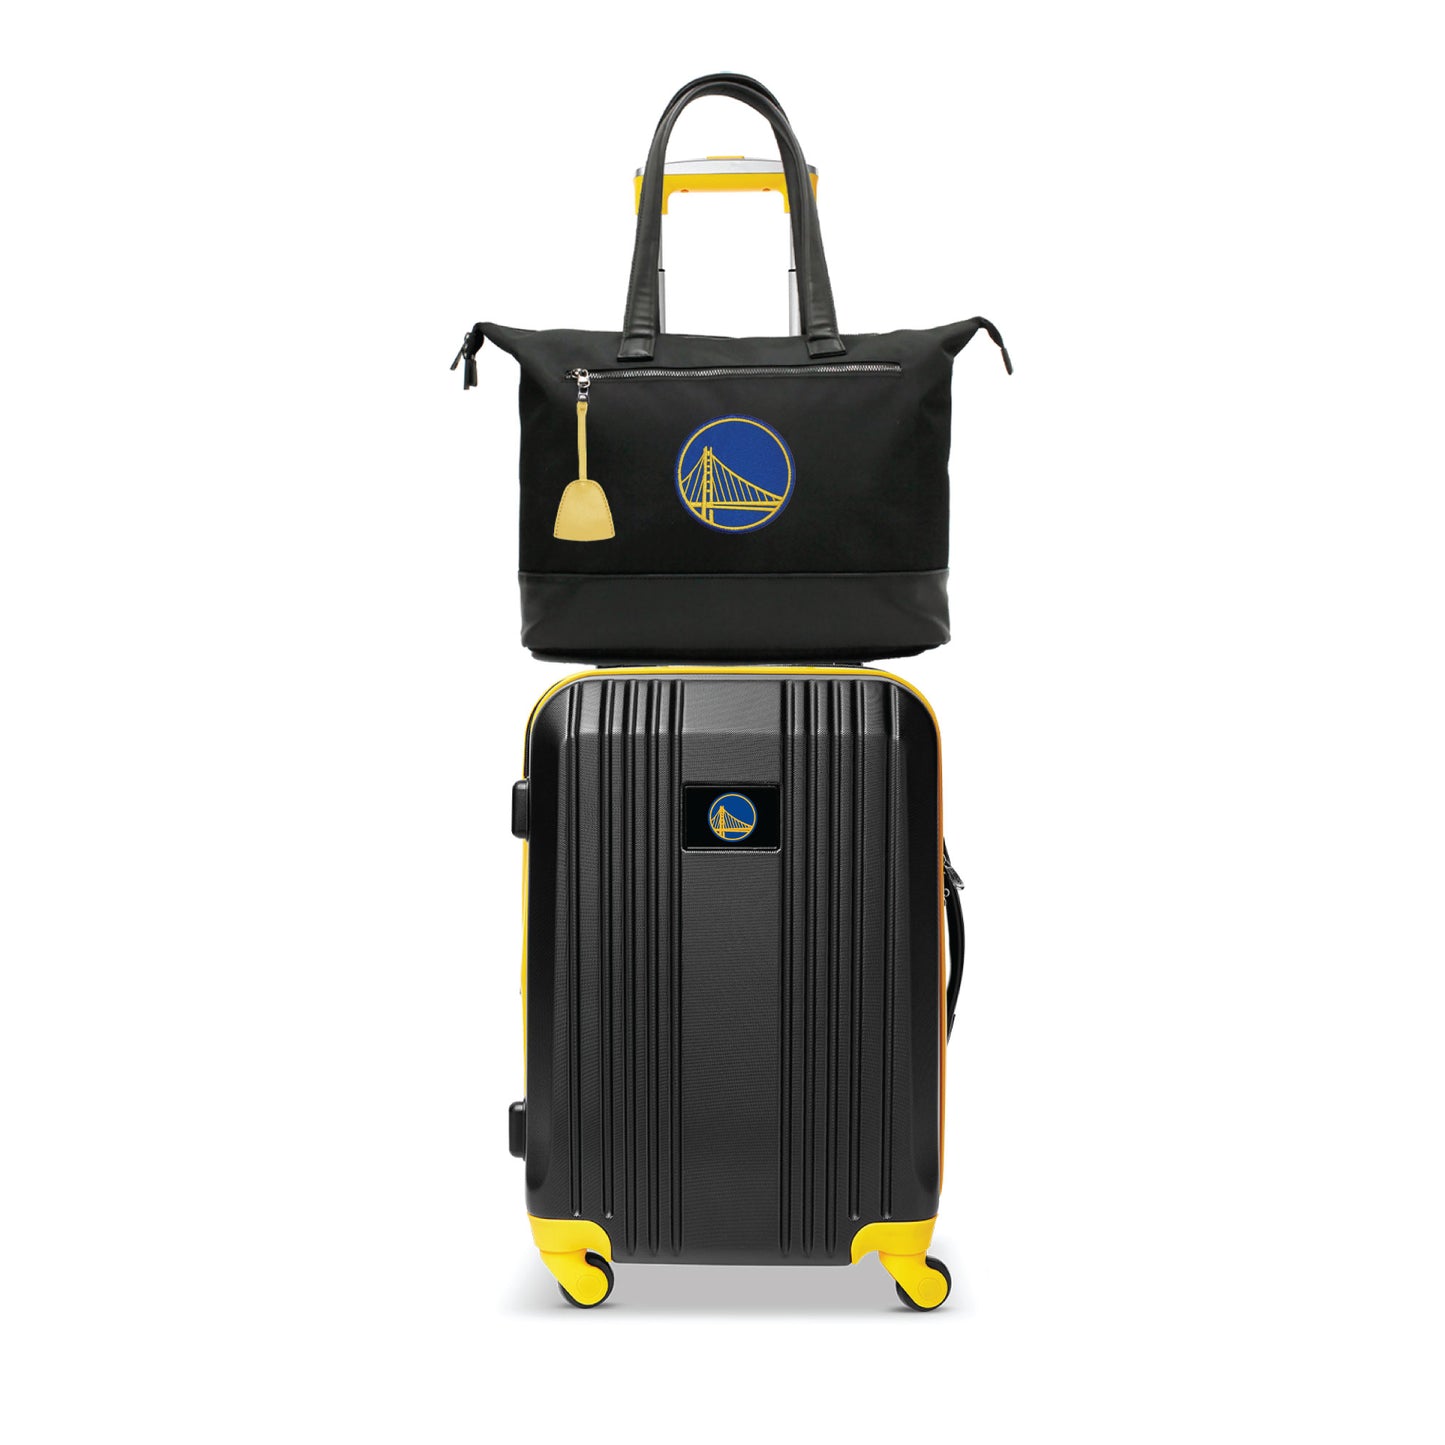 Golden State Warriors Premium Laptop Tote Bag and Luggage Set